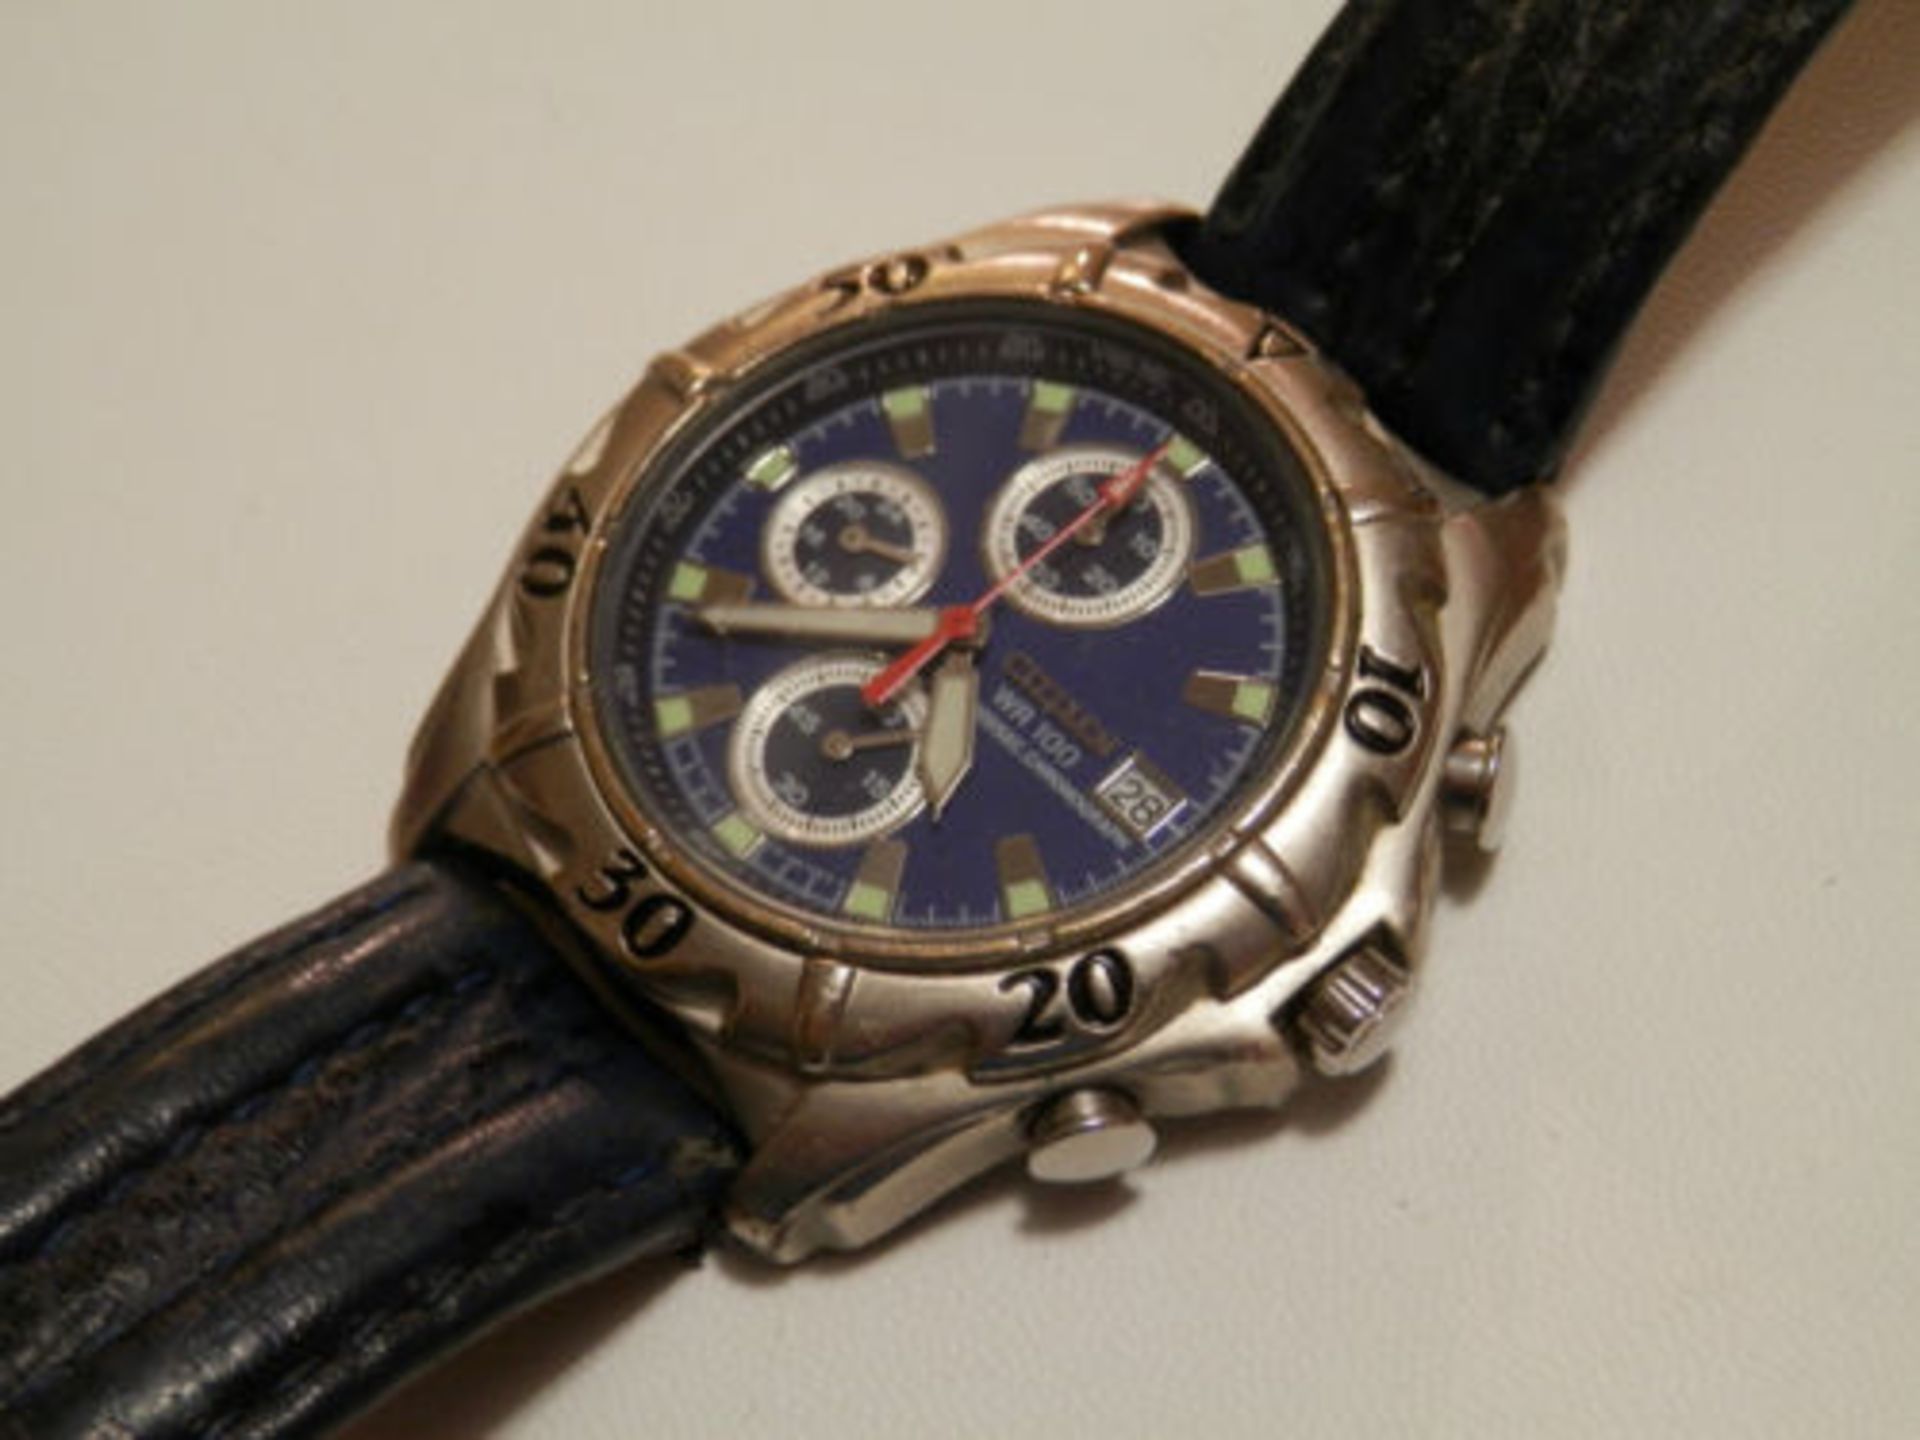 RETRO GENTS GENUINE CITIZEN 1990S MINI DIAL  CHRONOGRAPH DATE WATCH. ALL WORKING       GREAT CLASSIC - Image 5 of 11